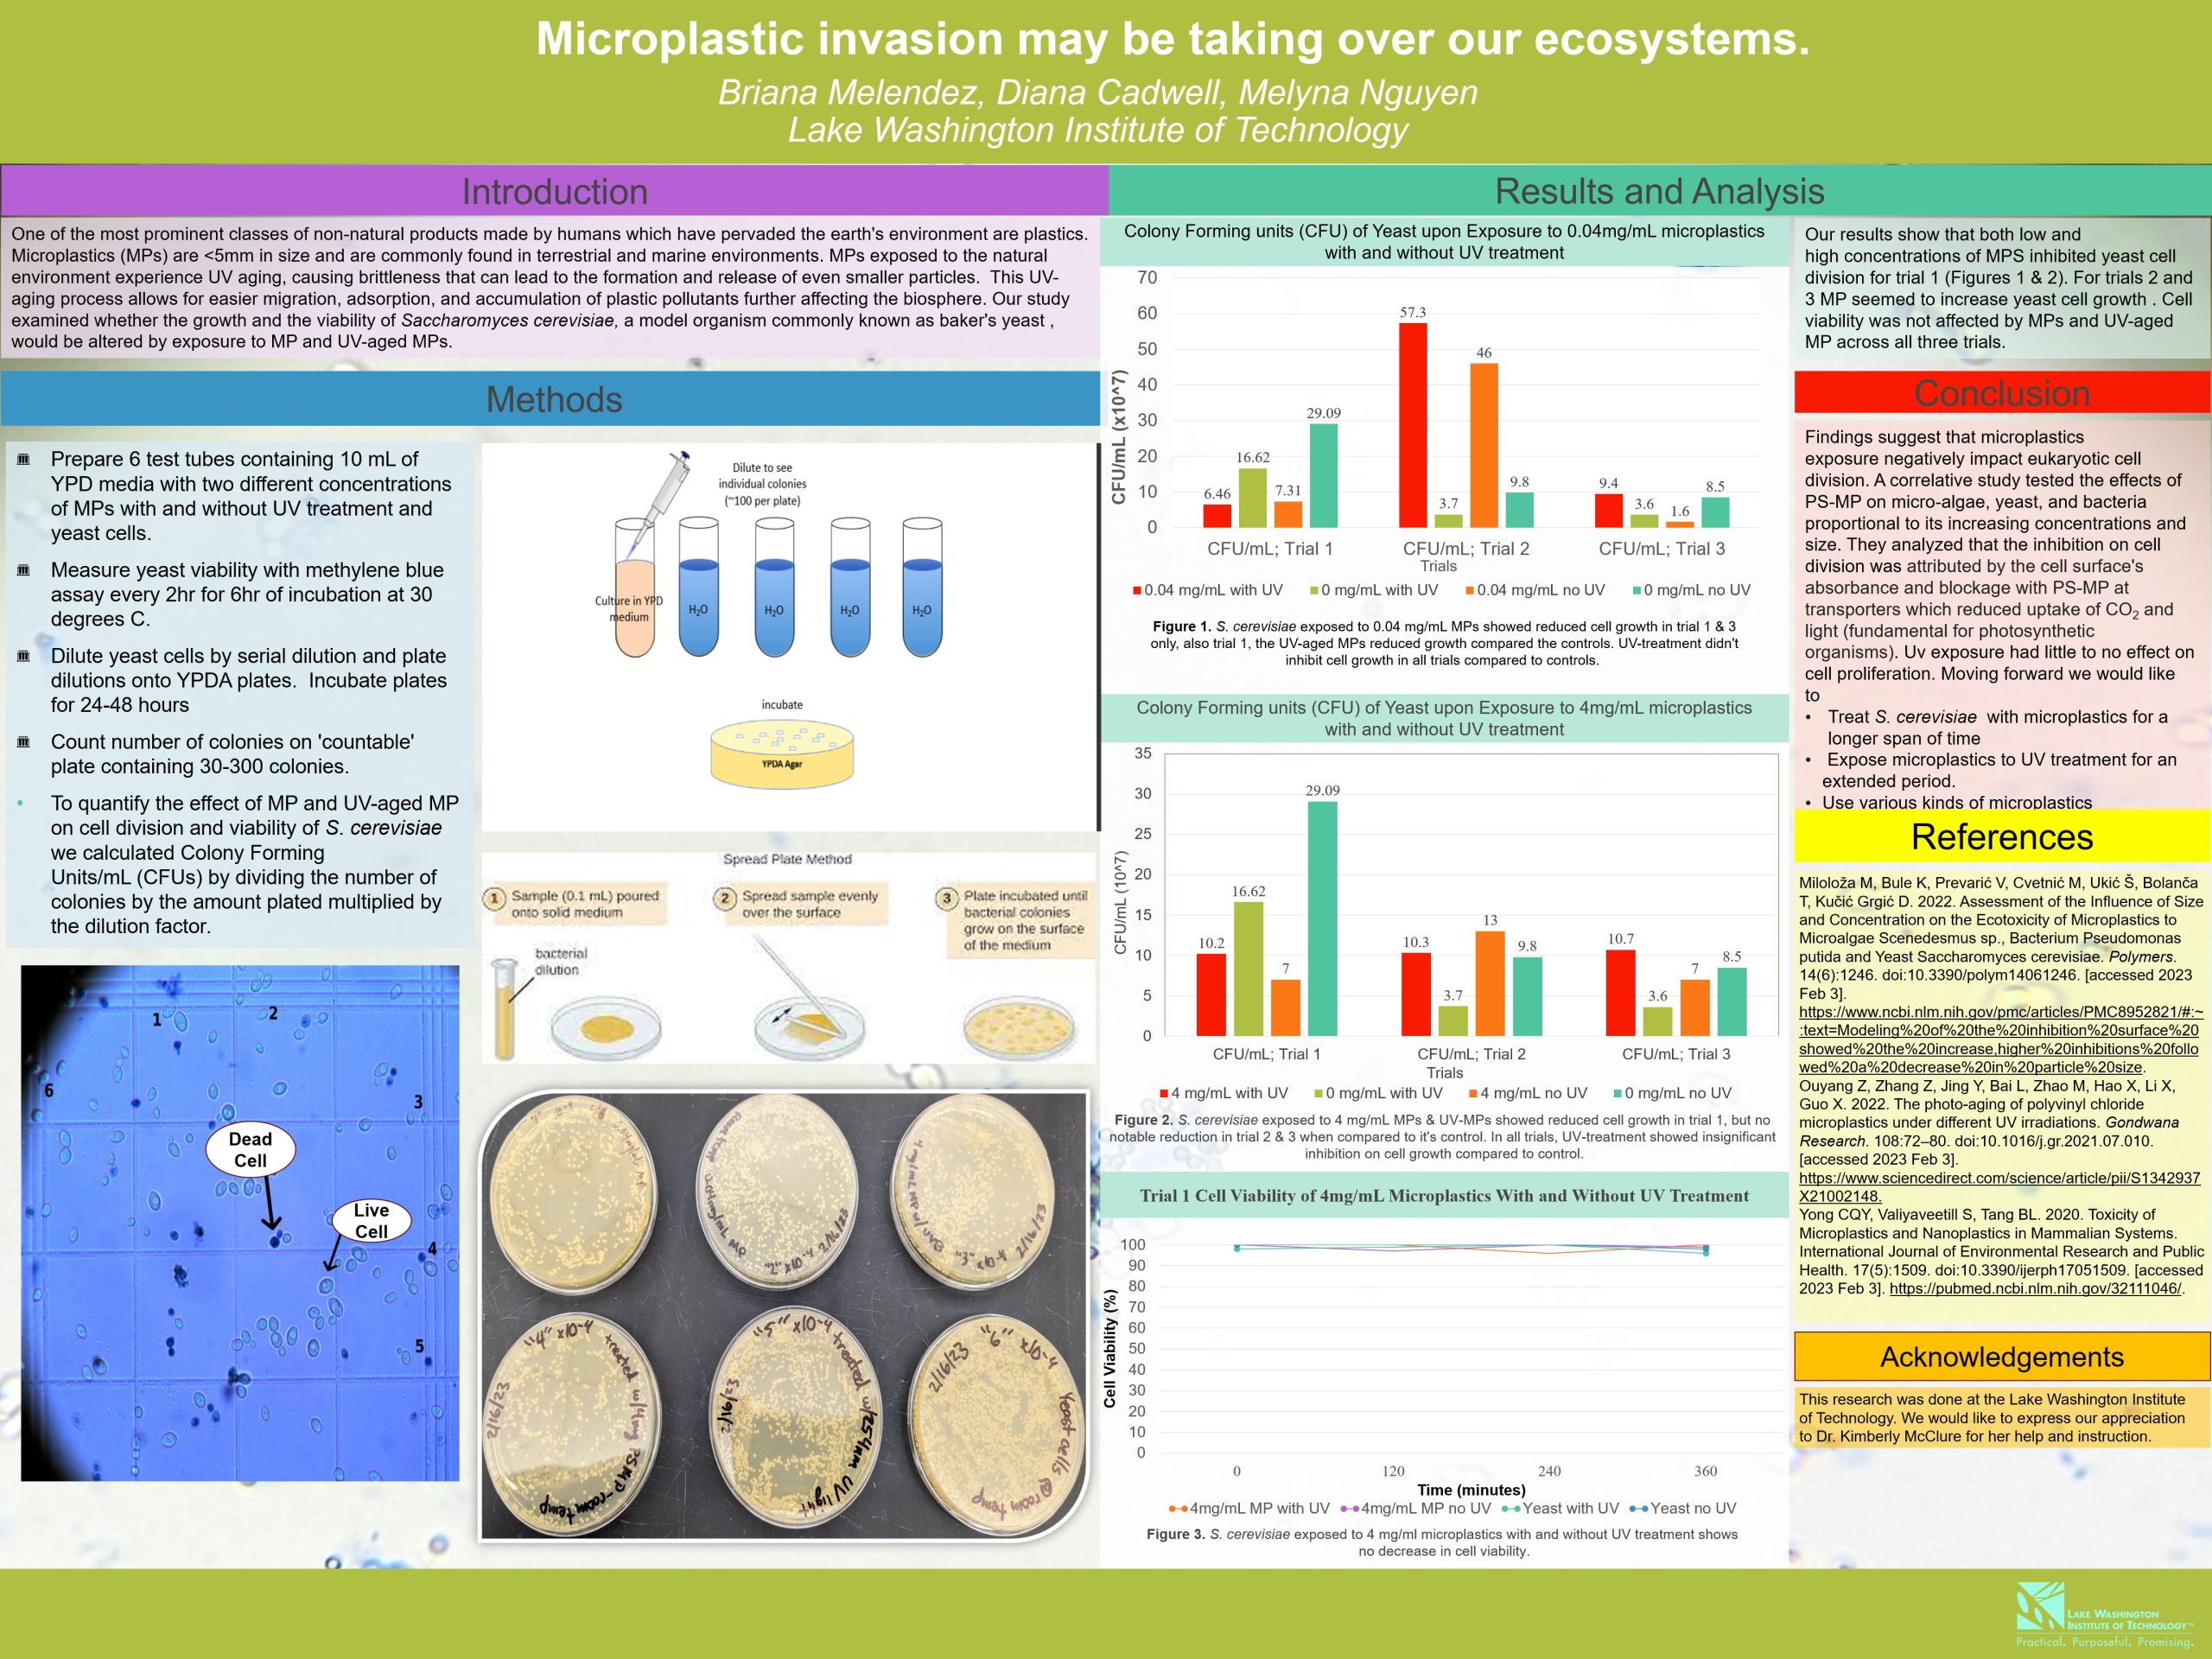 A research poster of a study examining whether an organism of yeast, Saccaromyces cerevisiae, would be altered by exposure to microplastics and UV-aged microplastics